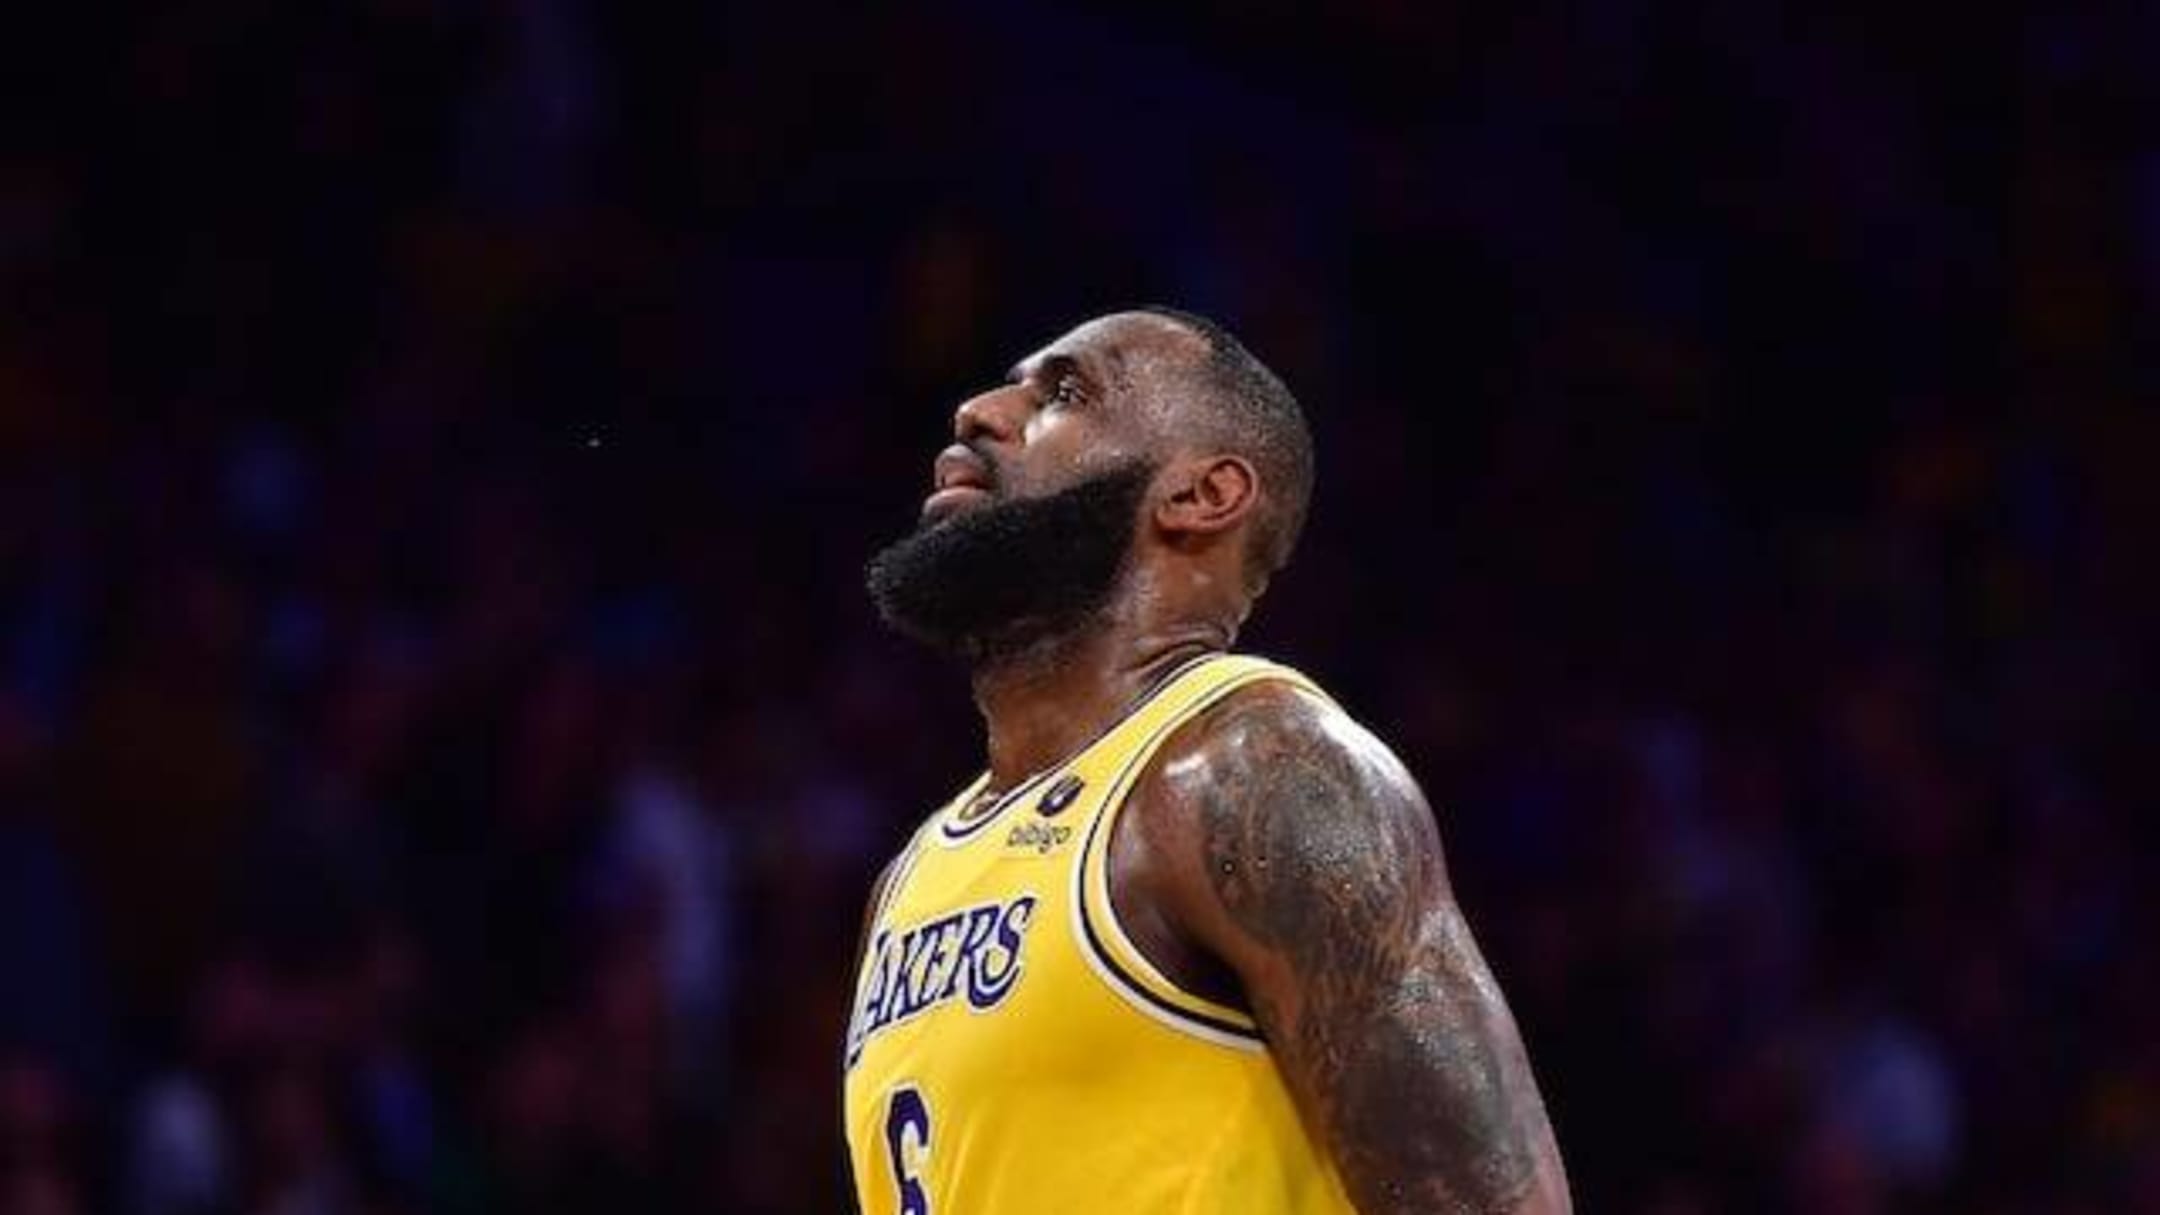 LeBron James stunned saying 'Why you do that to me?' as opponent